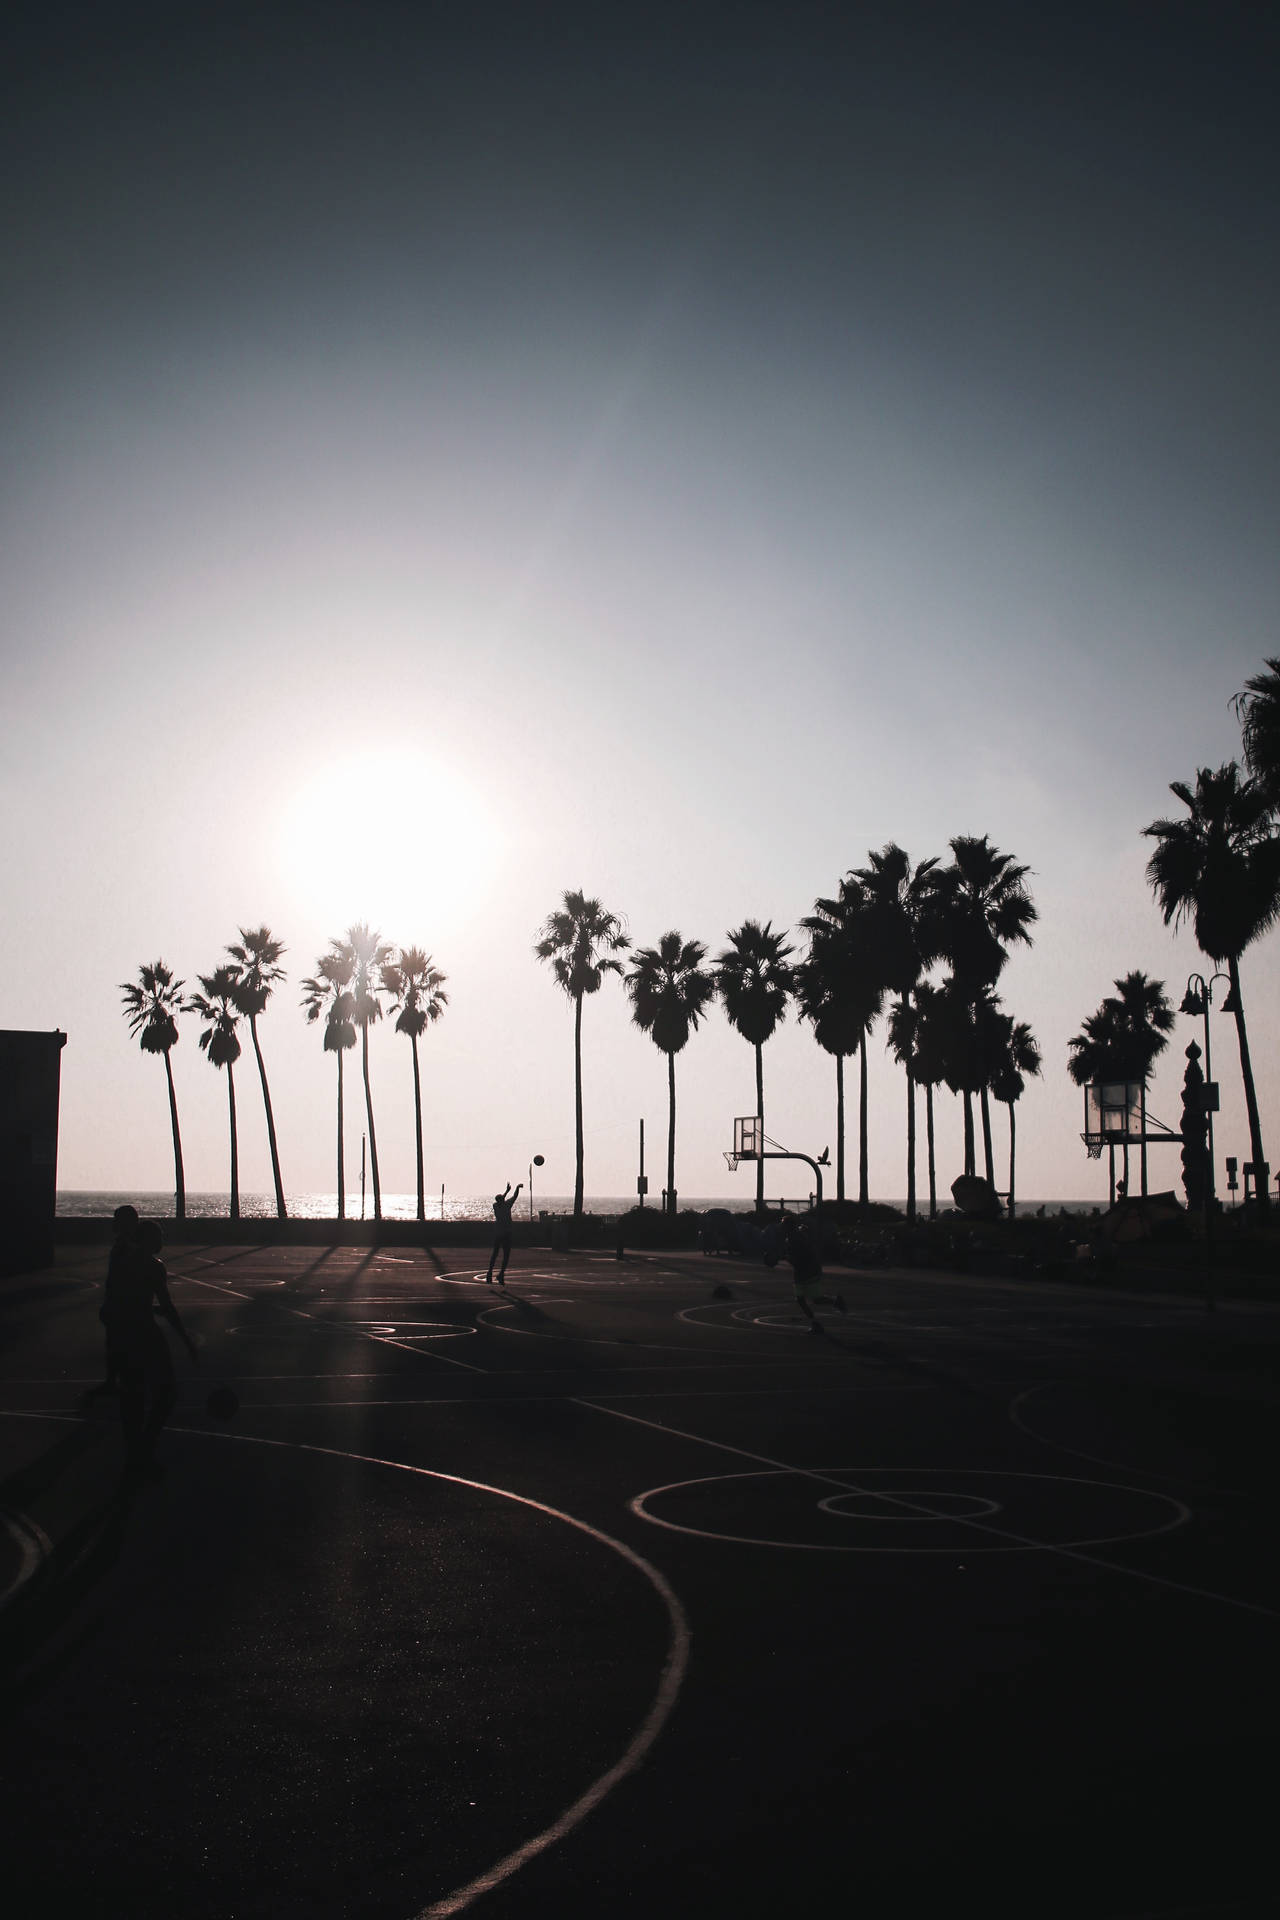 Hd Basketball Court With Trees Background